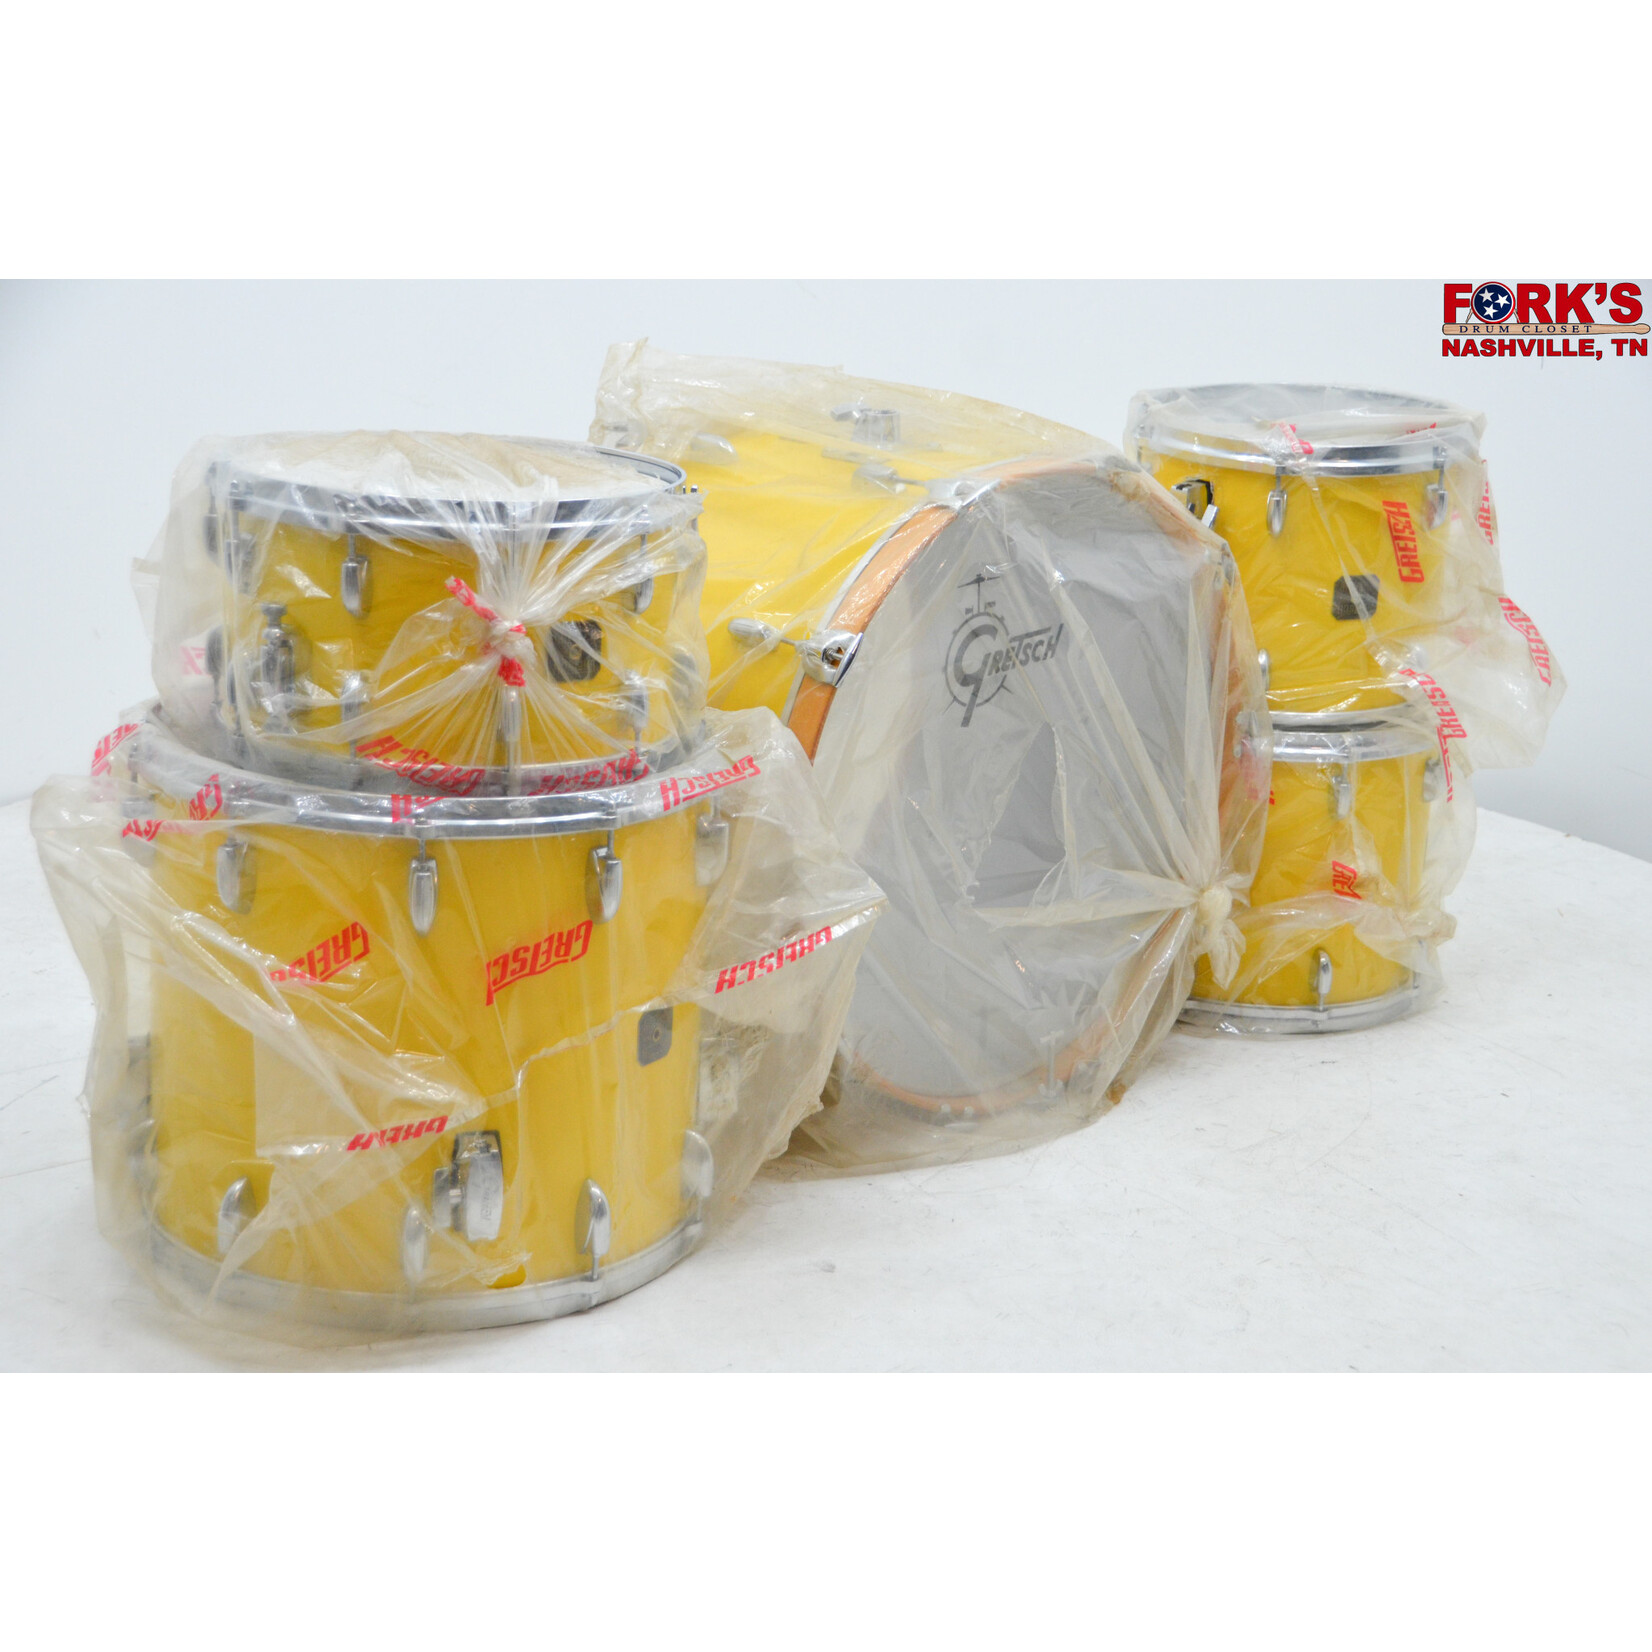 Gretsch (New Old Stock) Gretsch 5pc 1980's Drum Kit - "Yellow Lacquer"